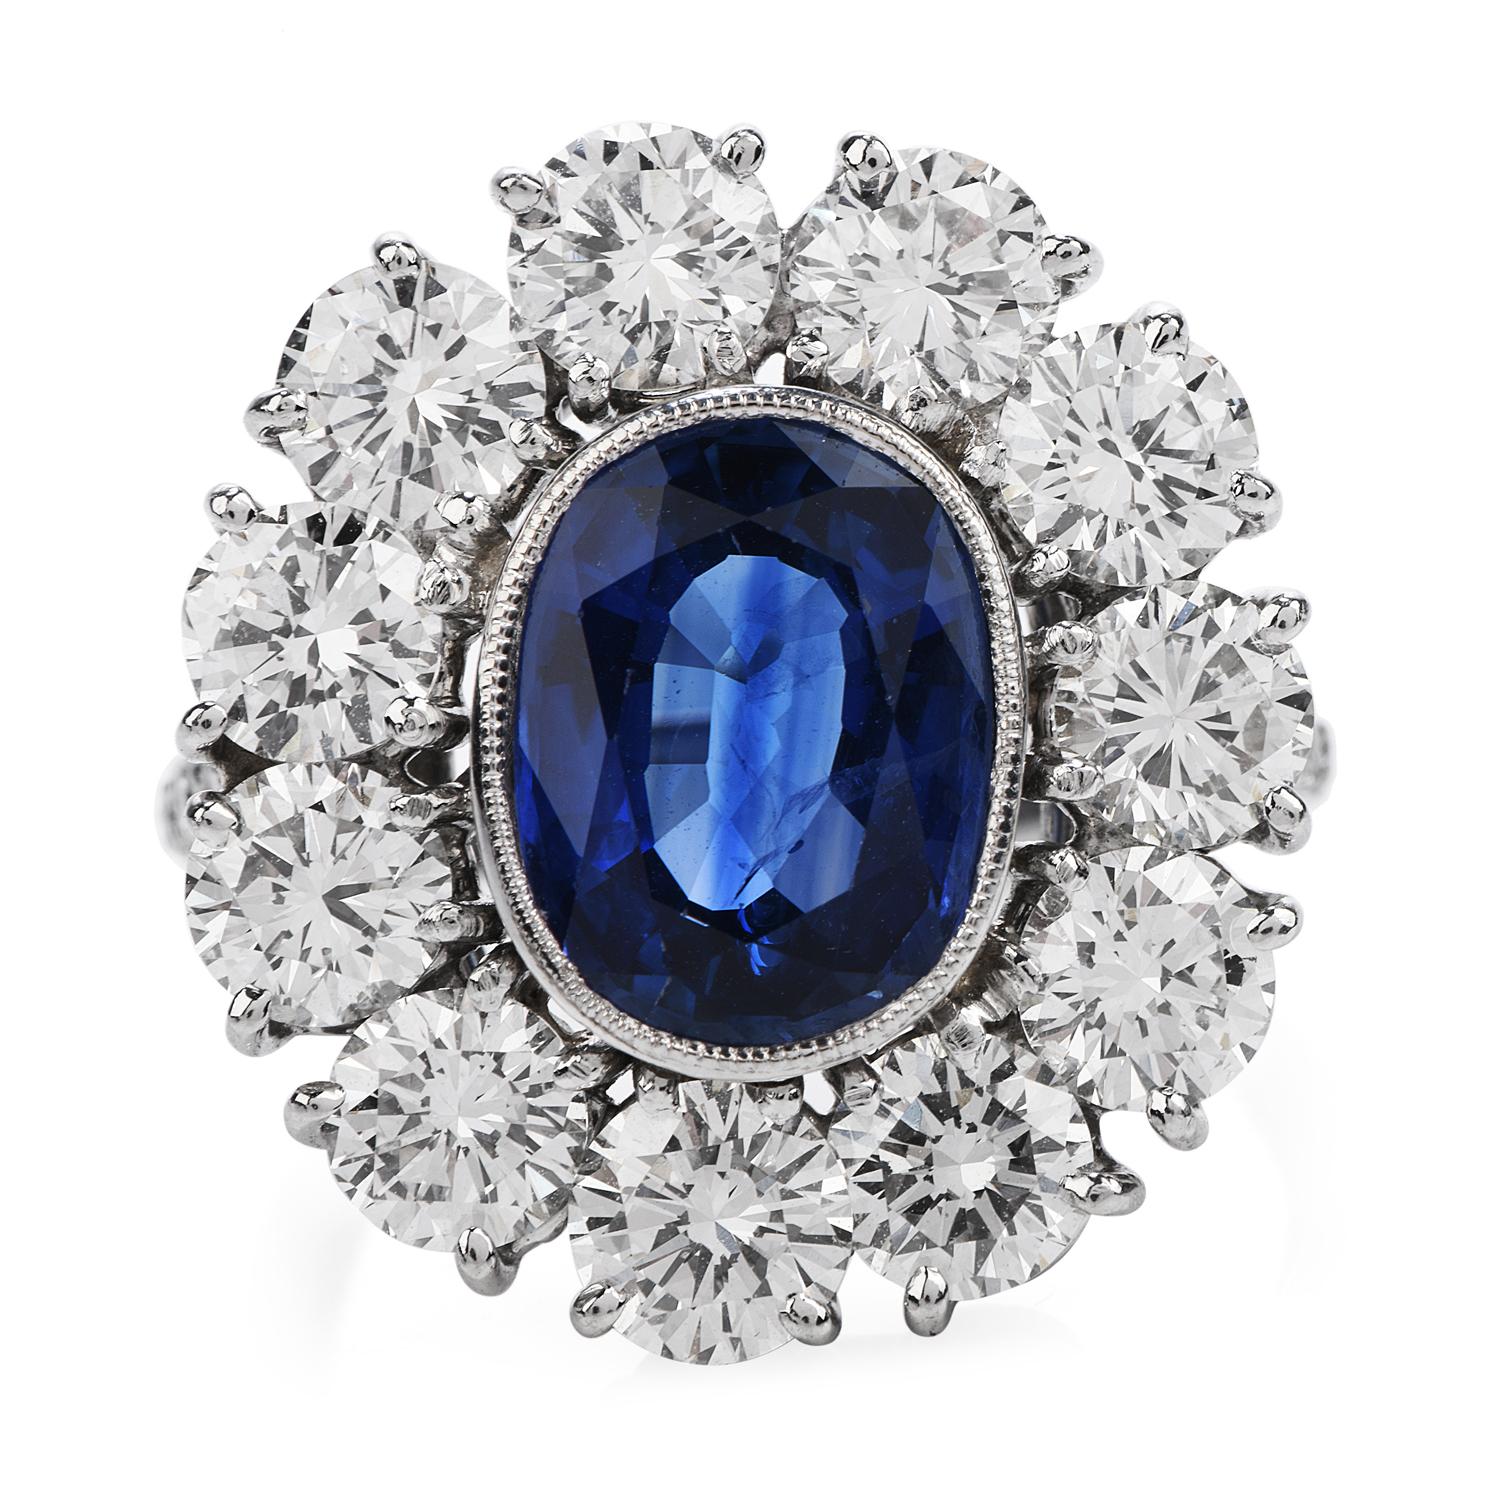 Shining from every angle, it is crafted in solid Platinum with an  Oval Cut And Bezel set,

GRS Certified Heated  Sri Lankan Ceylon Sapphire in the center weighing 4.10 carats,

surrounded by a Halo of Flower Petals, with Excellent Cut Round